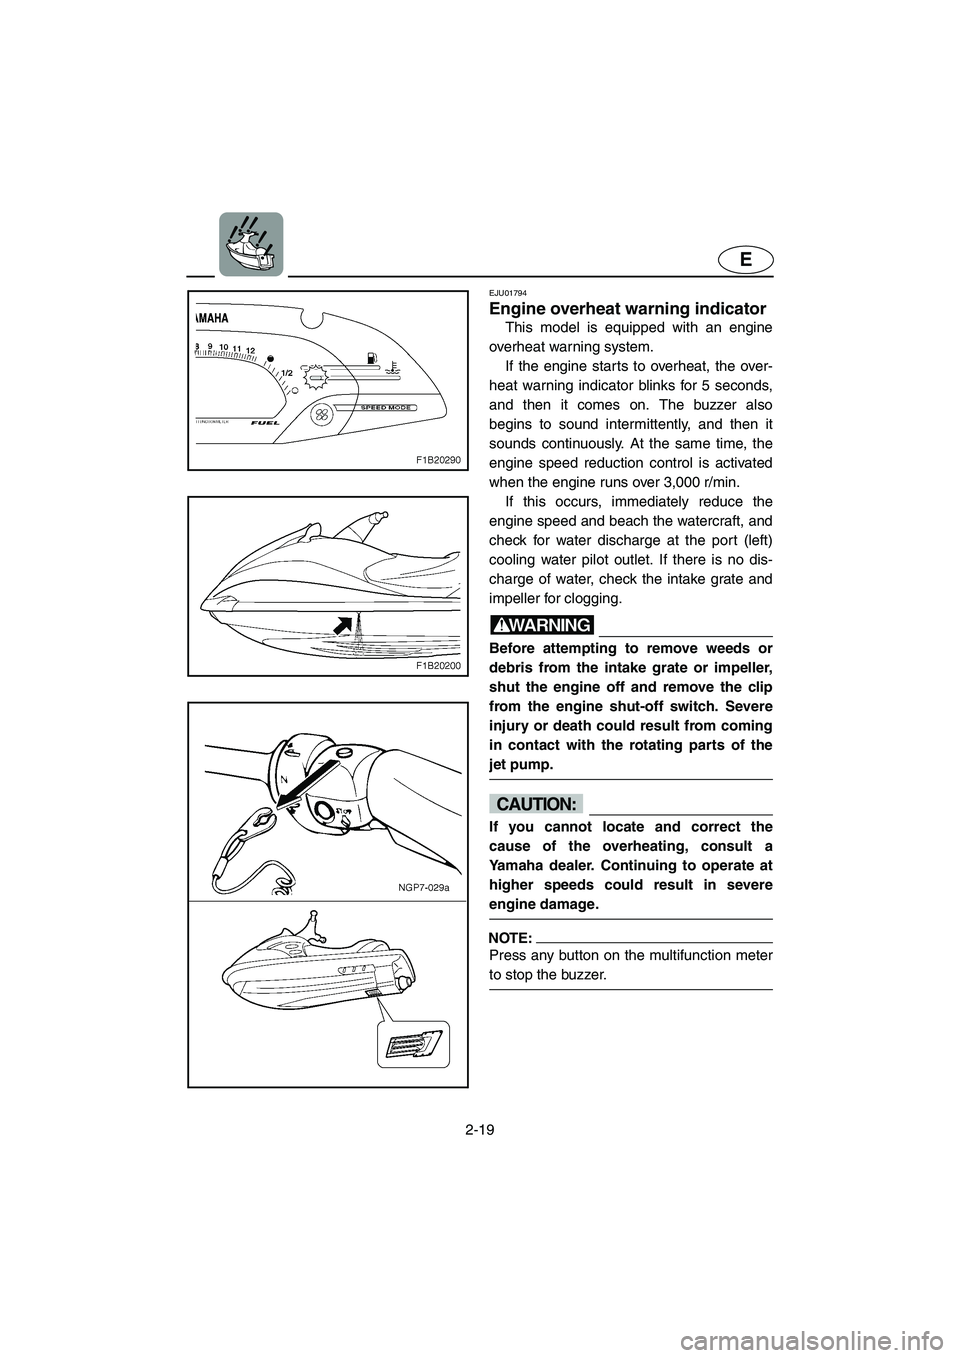 YAMAHA FX 2003  Owners Manual 2-19
E
EJU01794
Engine overheat warning indicator 
This model is equipped with an engine
overheat warning system. 
If the engine starts to overheat, the over-
heat warning indicator blinks for 5 secon